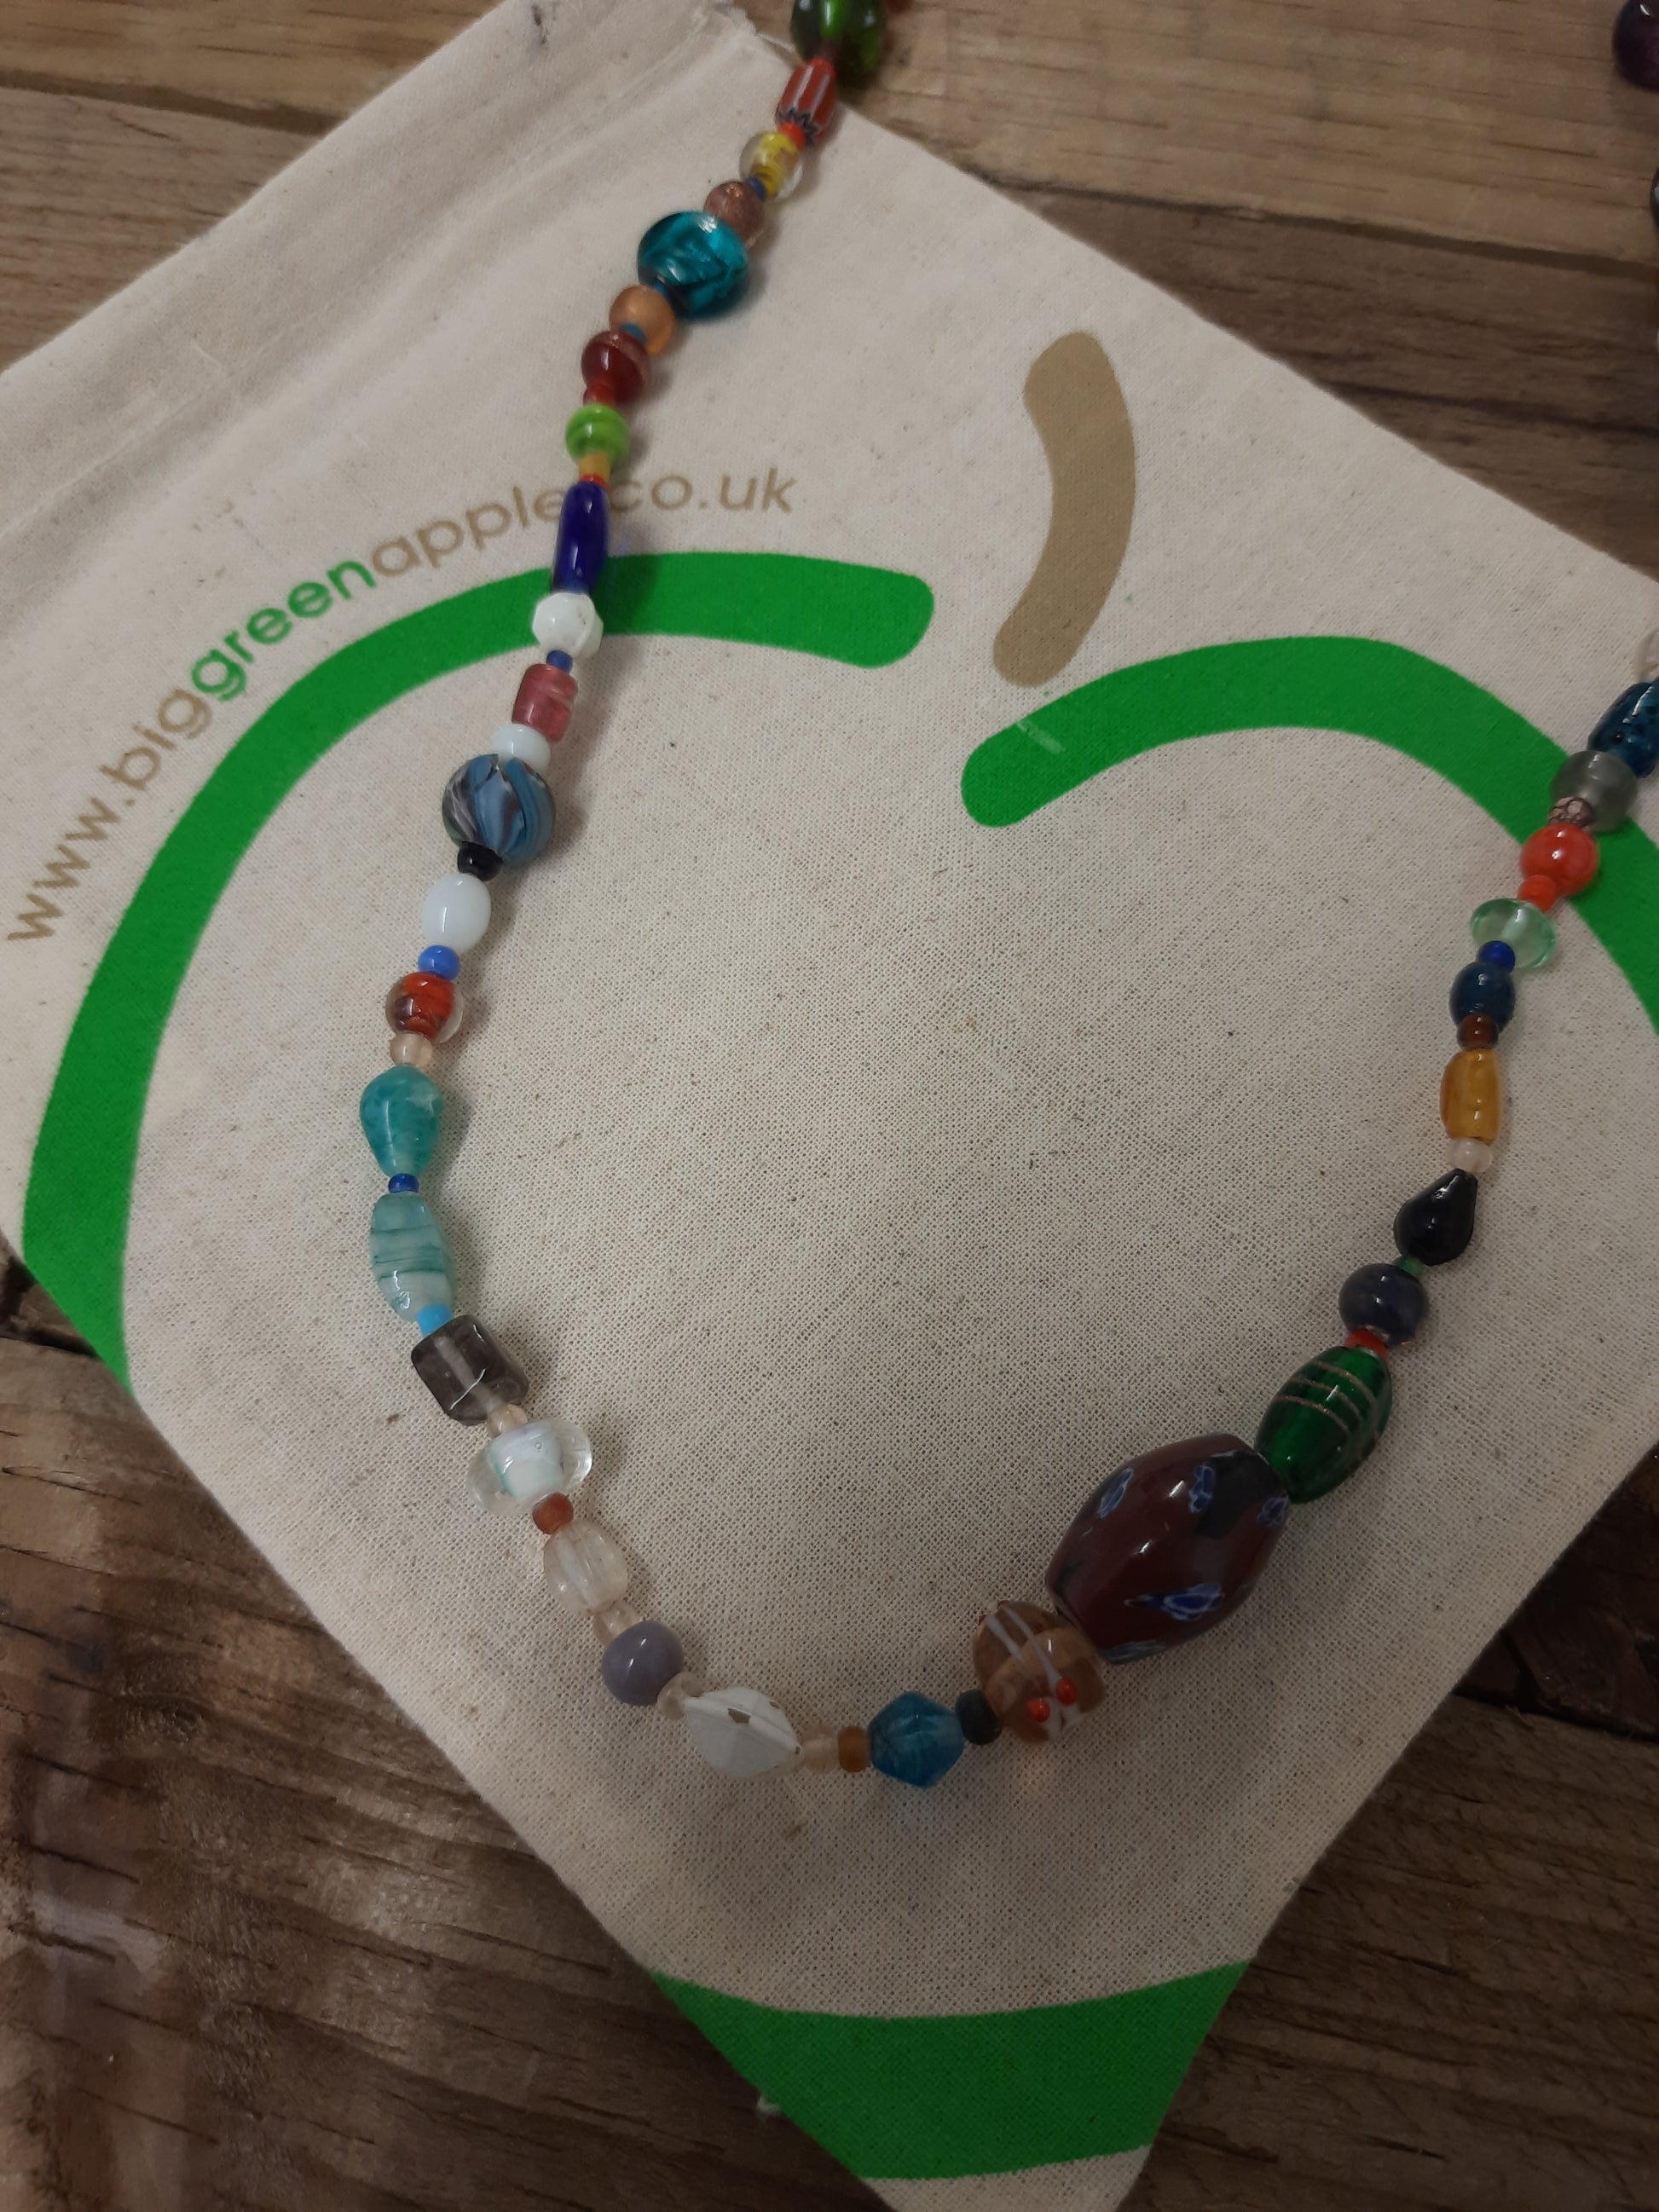 Ethical Jewellery UK, Necklaces, Necklace Set, Christmas Gifts, Eco Conscious, BIG GREEN APPLE